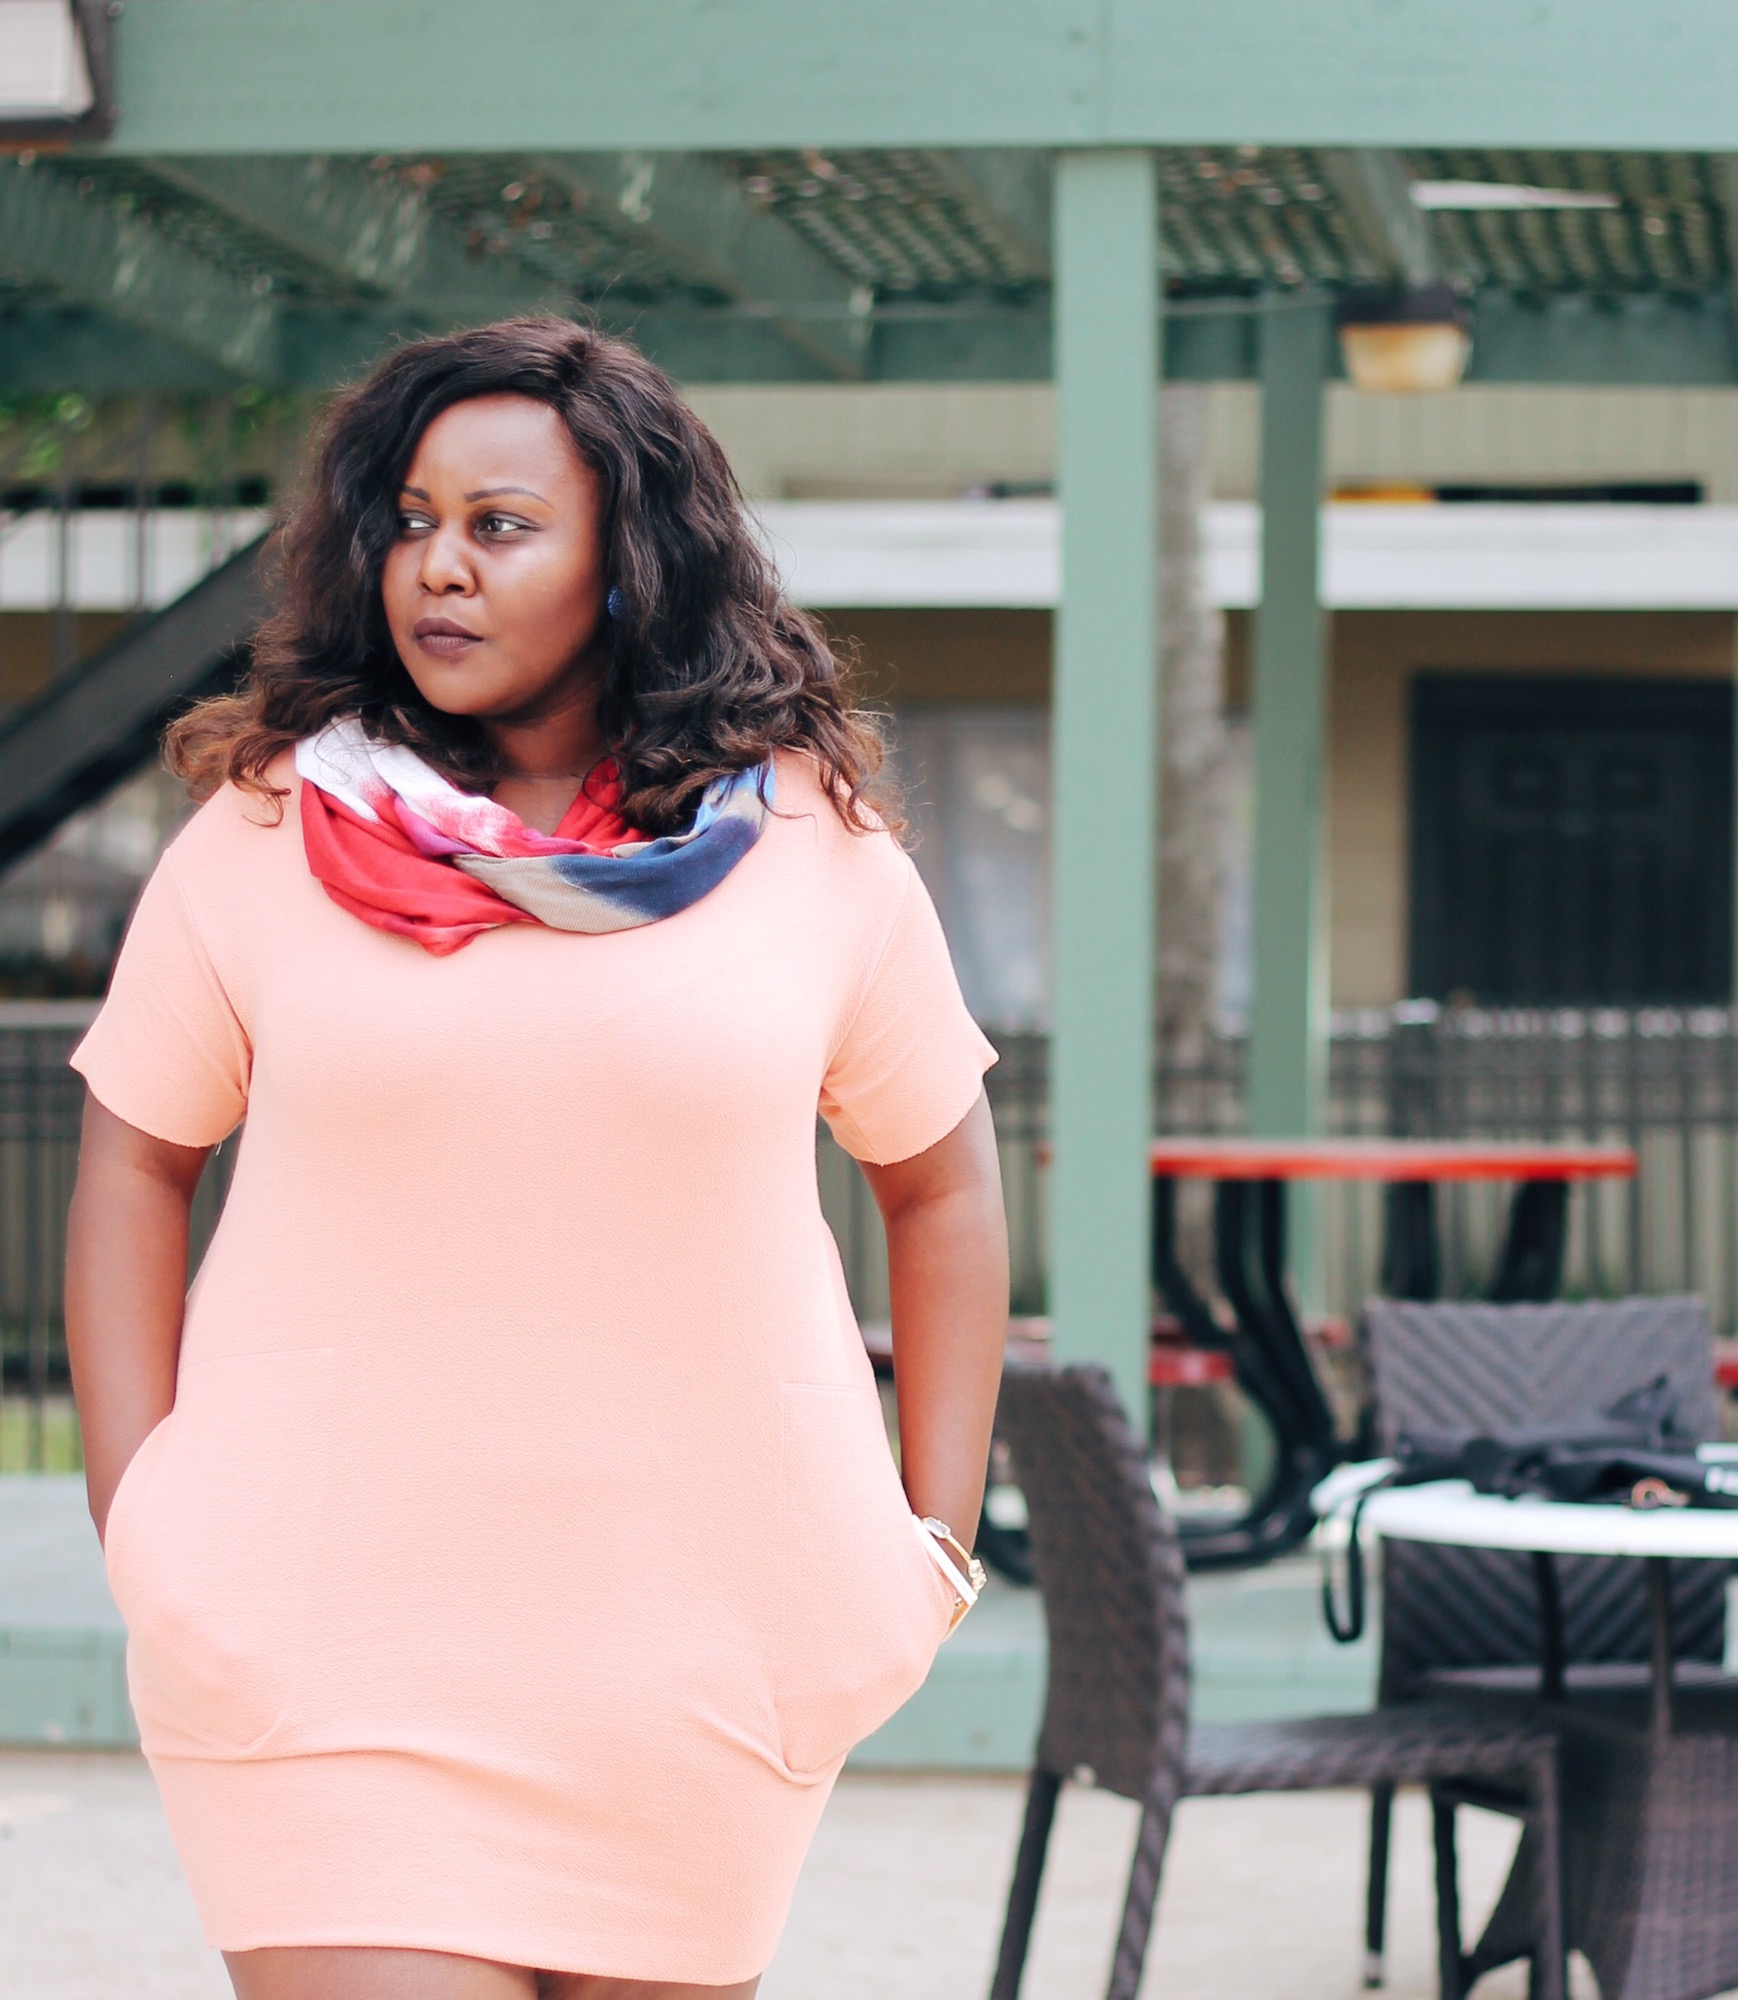 asos curve bloggers, beautiful curvy girls, curvy style dark skin fashion blogger curvy style blogger, dark skin beauty blogger, dark skin blogger, houston blogger, inspiration for 2016, inspiring bloggers and blogs, new years resolutions, plus size blogger, quotes for 2016, relationship advice blogs, rules to live by in the new year, texas blogger, travel blogger, ugandan blogger, ugandan fashionista, ugandan style blogger, african print ankara skirt styles, where to get african print clothes in America and uk, exposure african crafts in kampala uganda, kyaligonza kampala african material, Steve Madden Bowwtye Heel Sandal, catherine malandrino boots, zara, tjmaxx